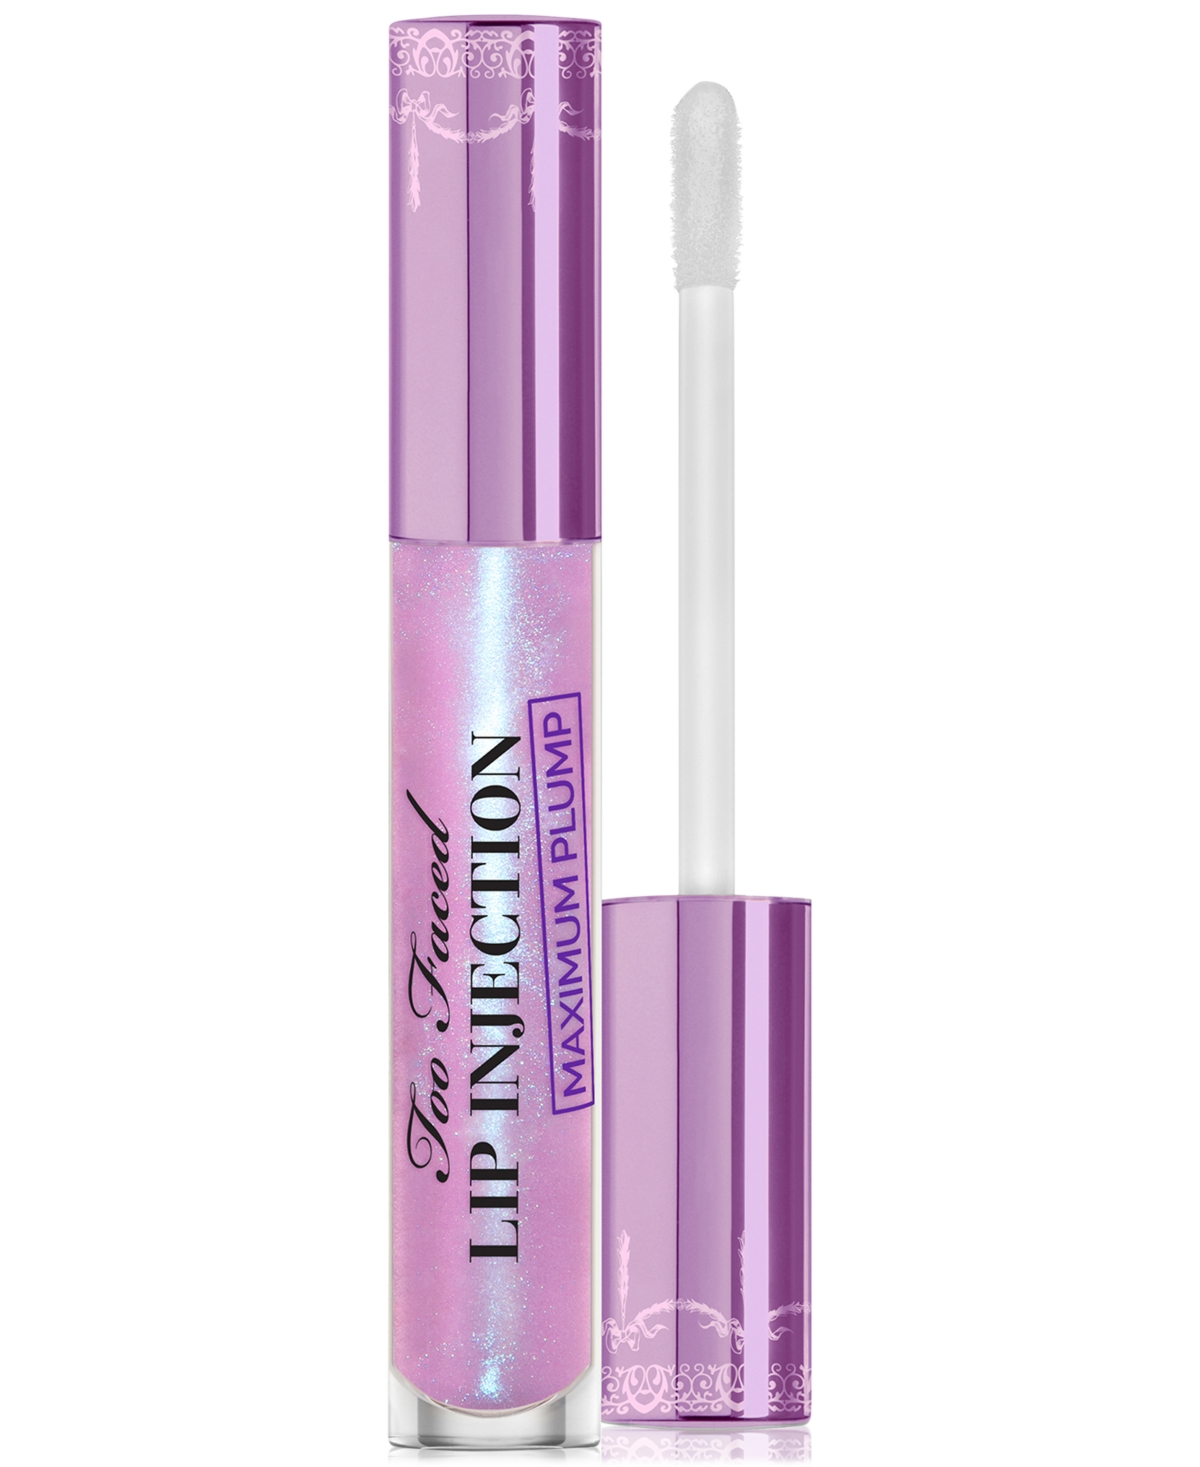 Too Faced Lip Injection Maximum Plump In Blueberry Buzz